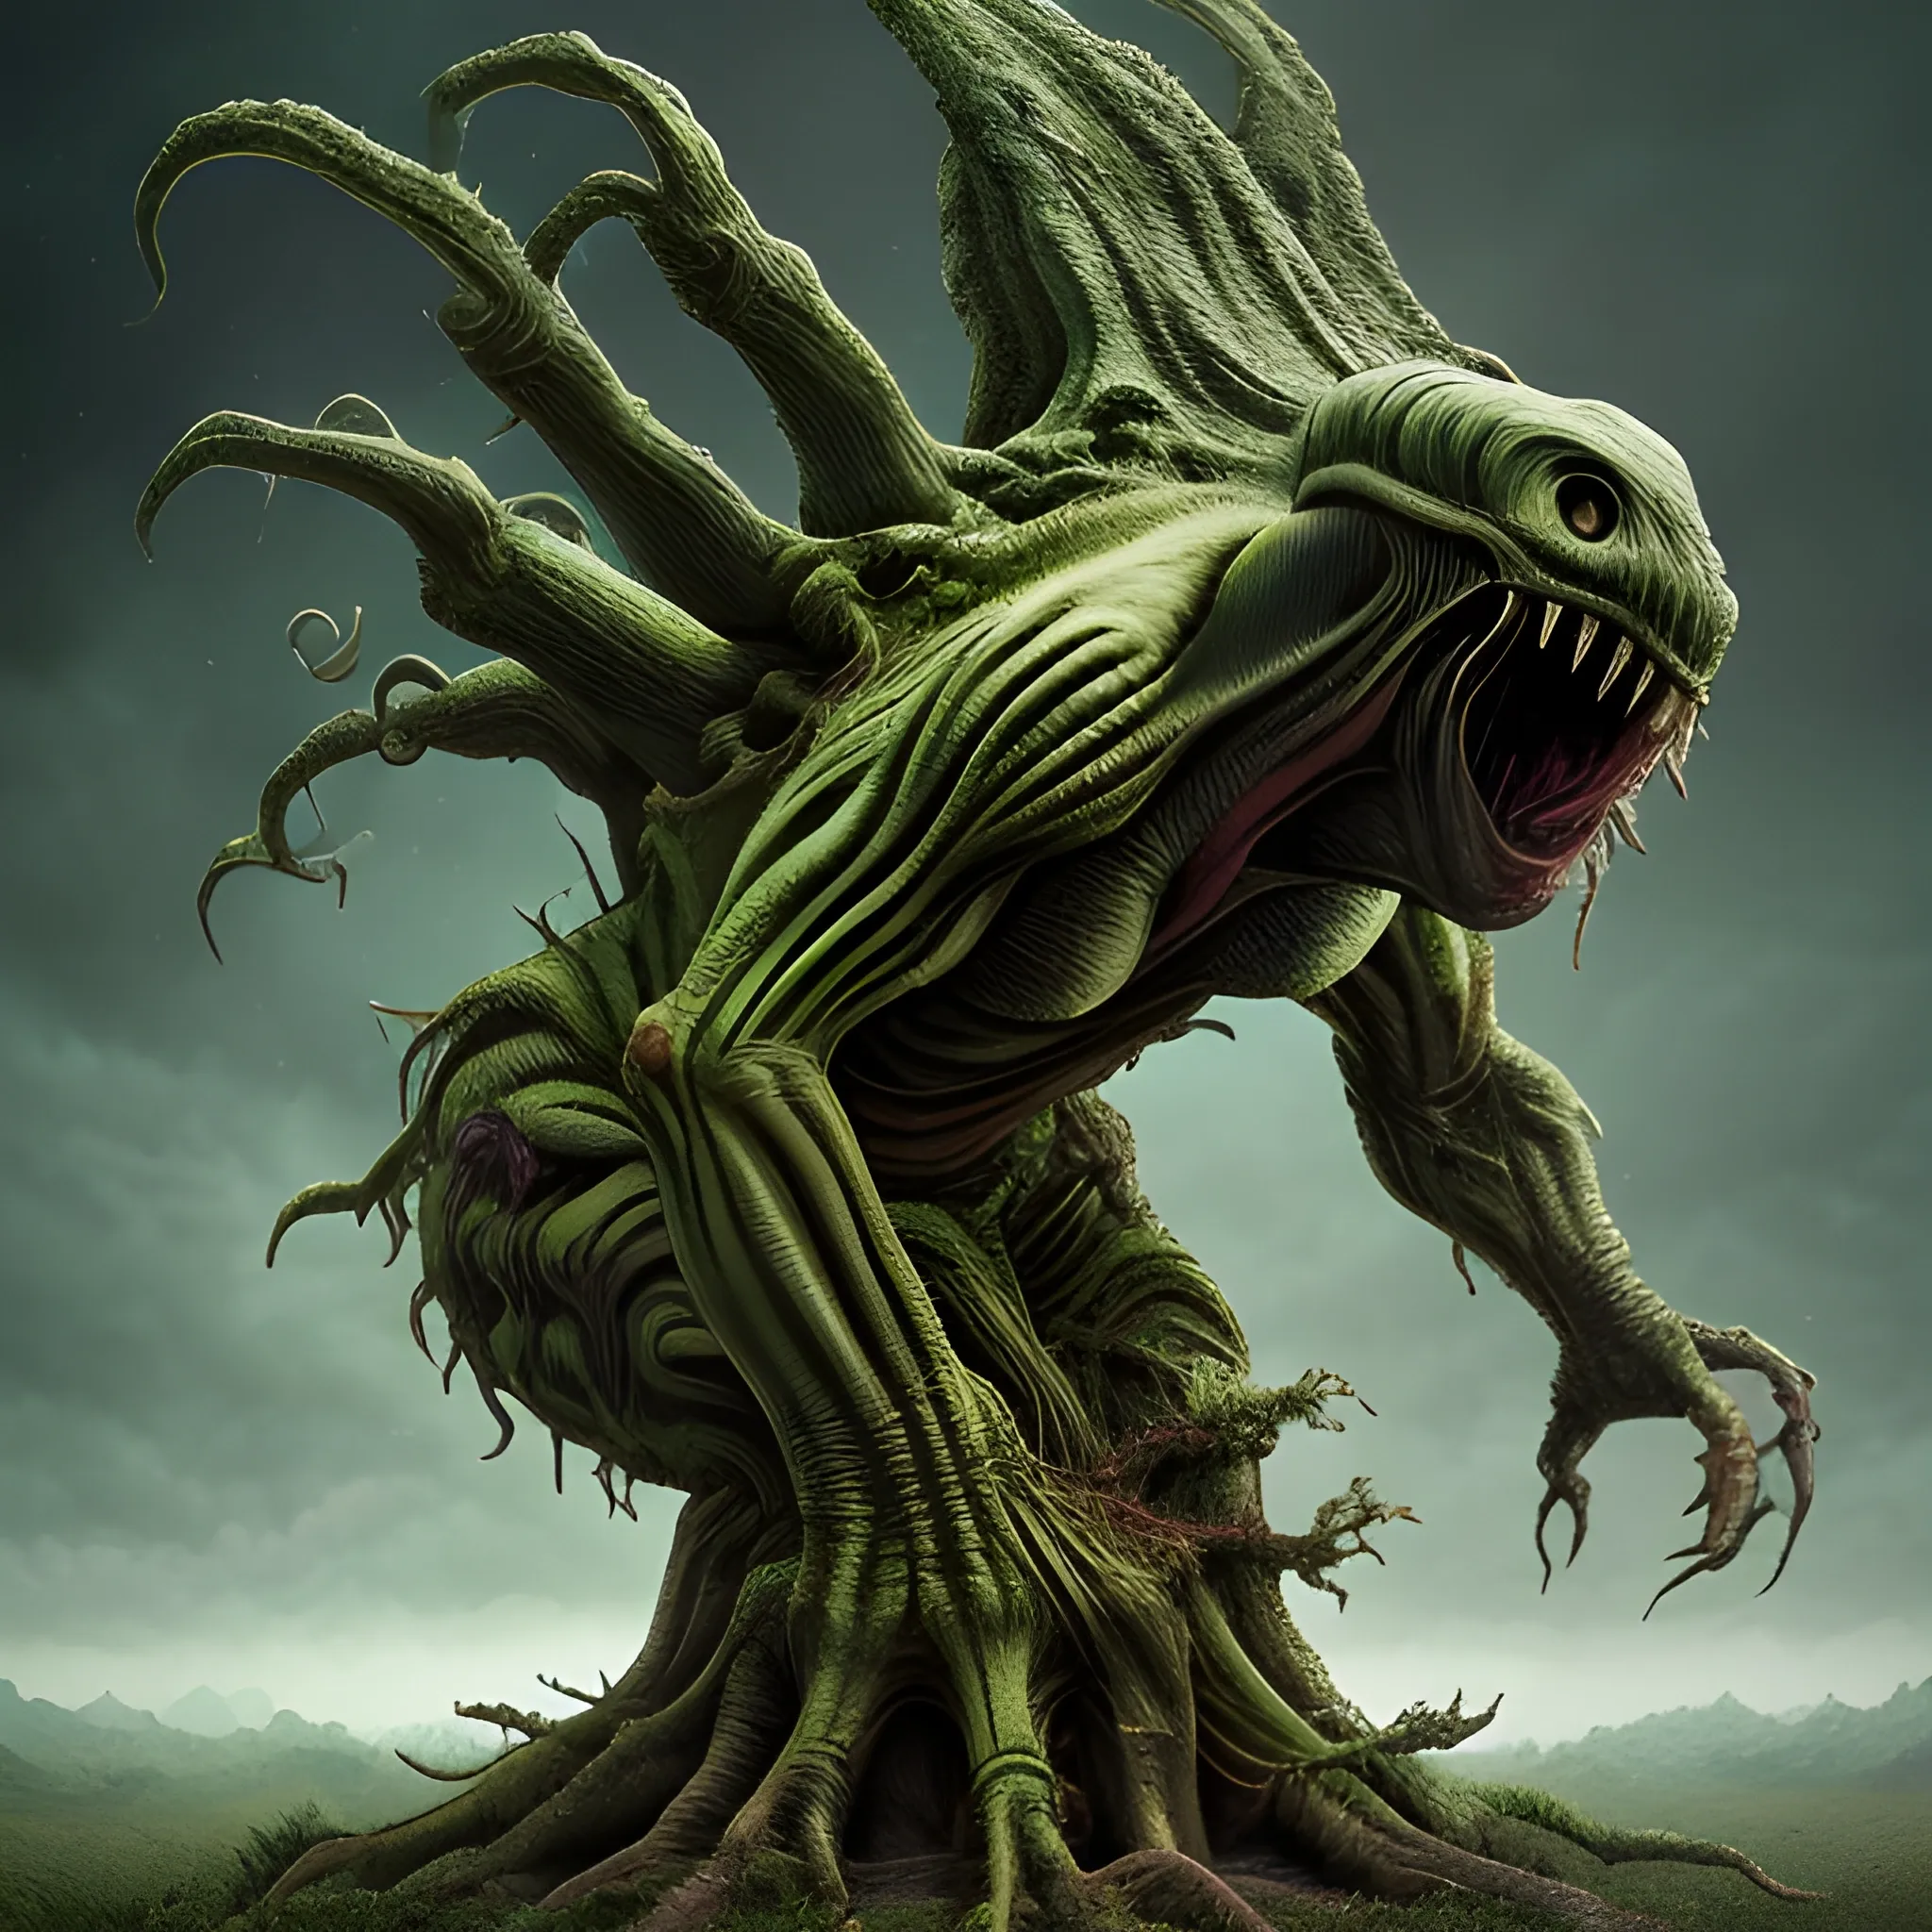 A detailed high resolution photo of a tree size alien devourer, this attacking monster is a masterpiece